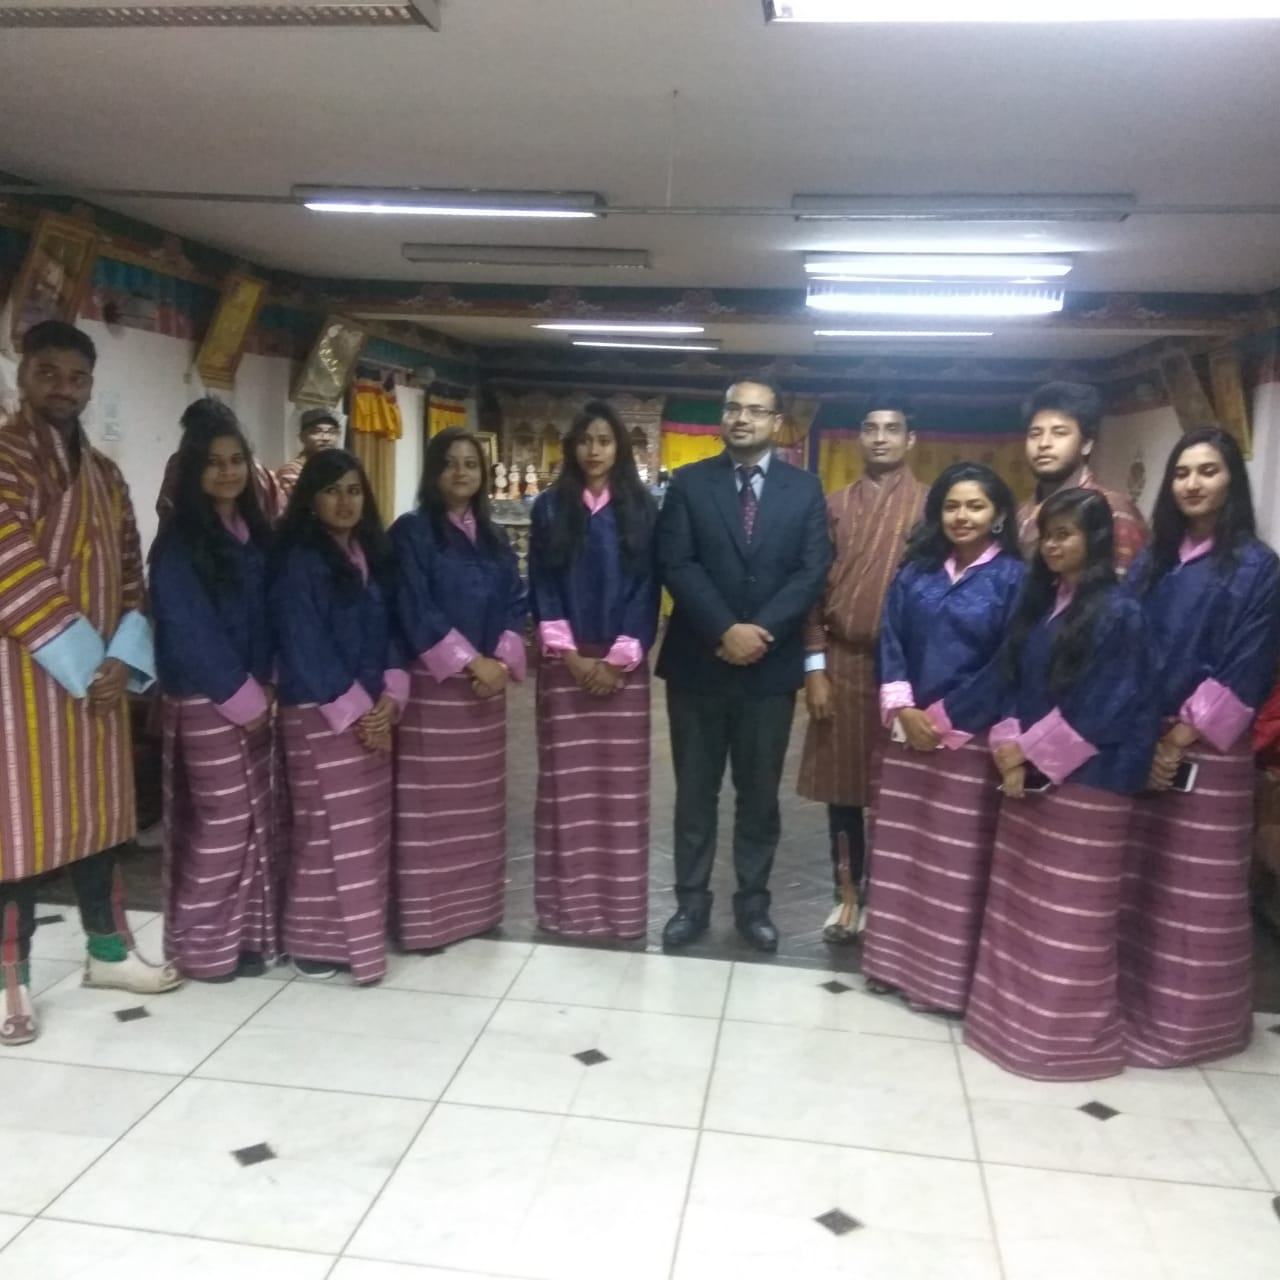 BHUTAN TRIP:STUDENTS INTERACTED WITH THE ART & CULTURE OF BHUTAN